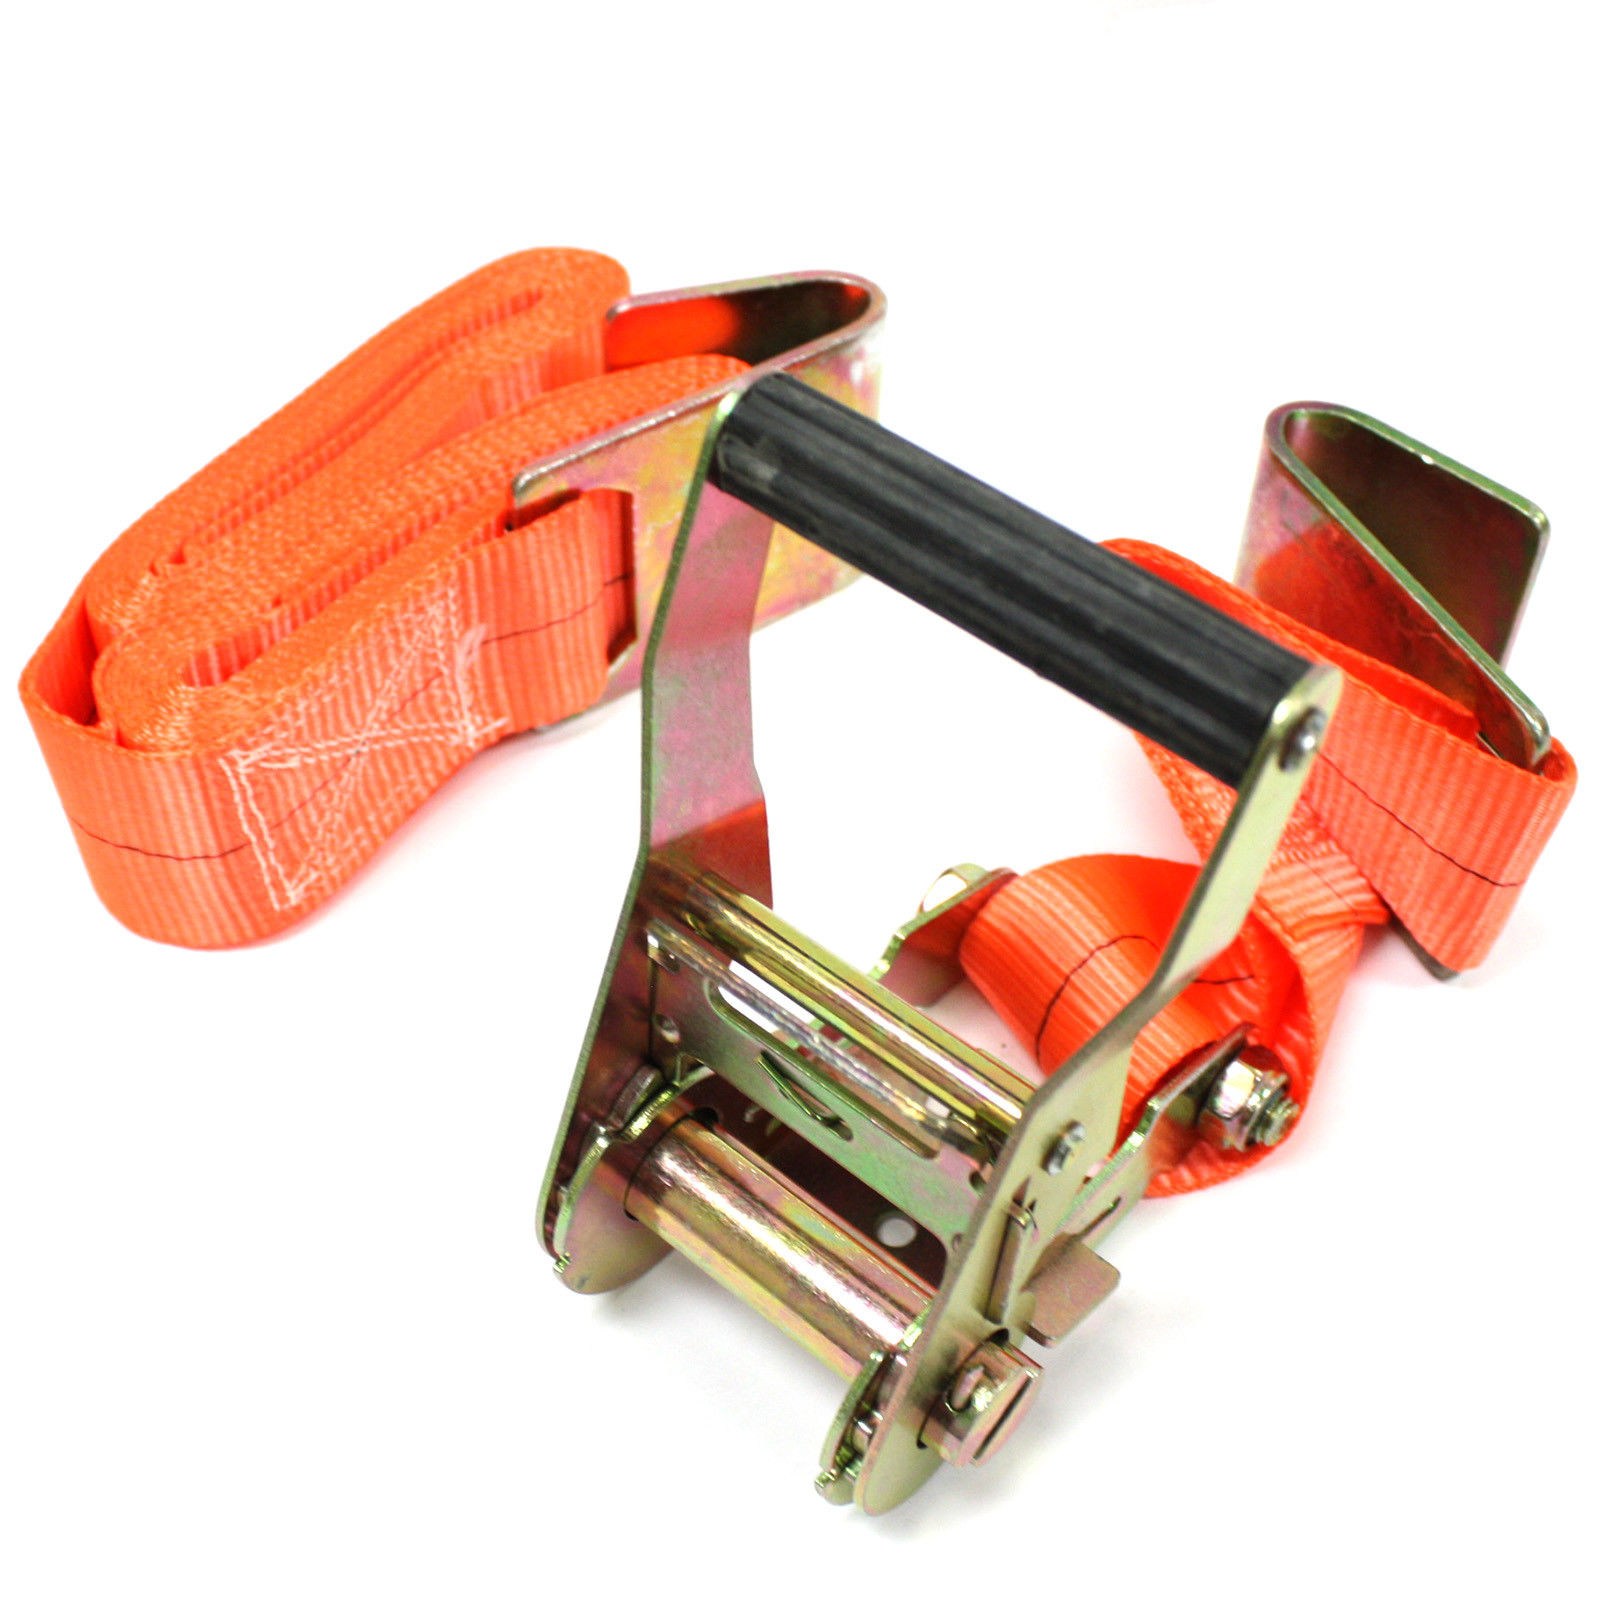 2" x 20' ft Ratchet Tie Down with Flat Hook Cargo Strap Quick Thumb Release Ties 